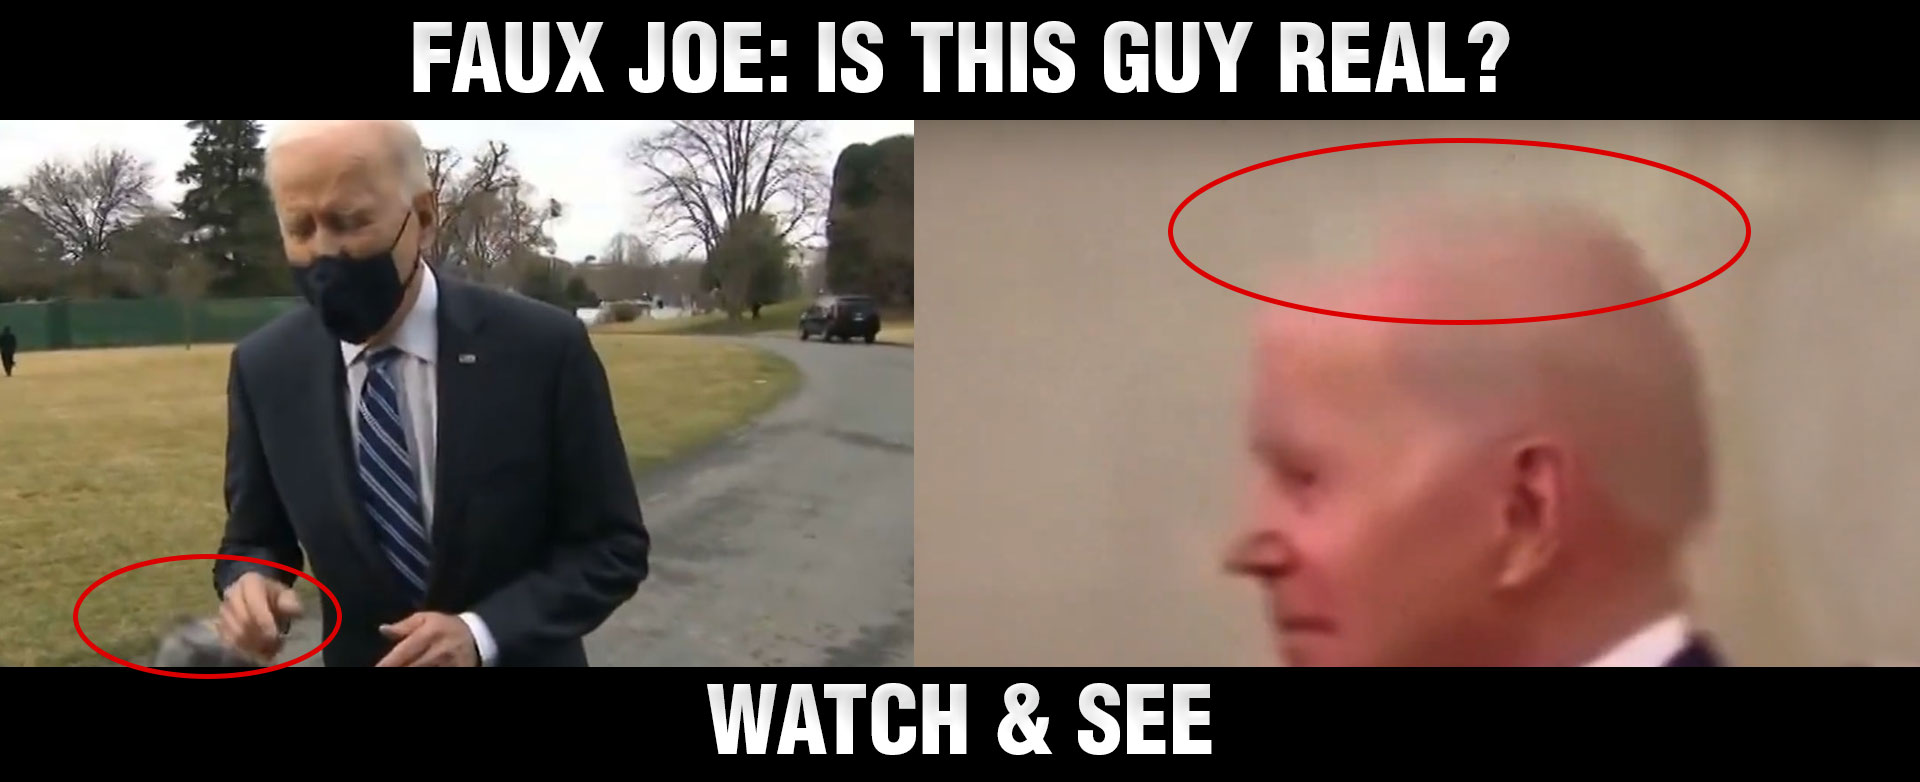 MyPatriotsNetwork-Faux Joe: Is This Guy Real? Watch & See